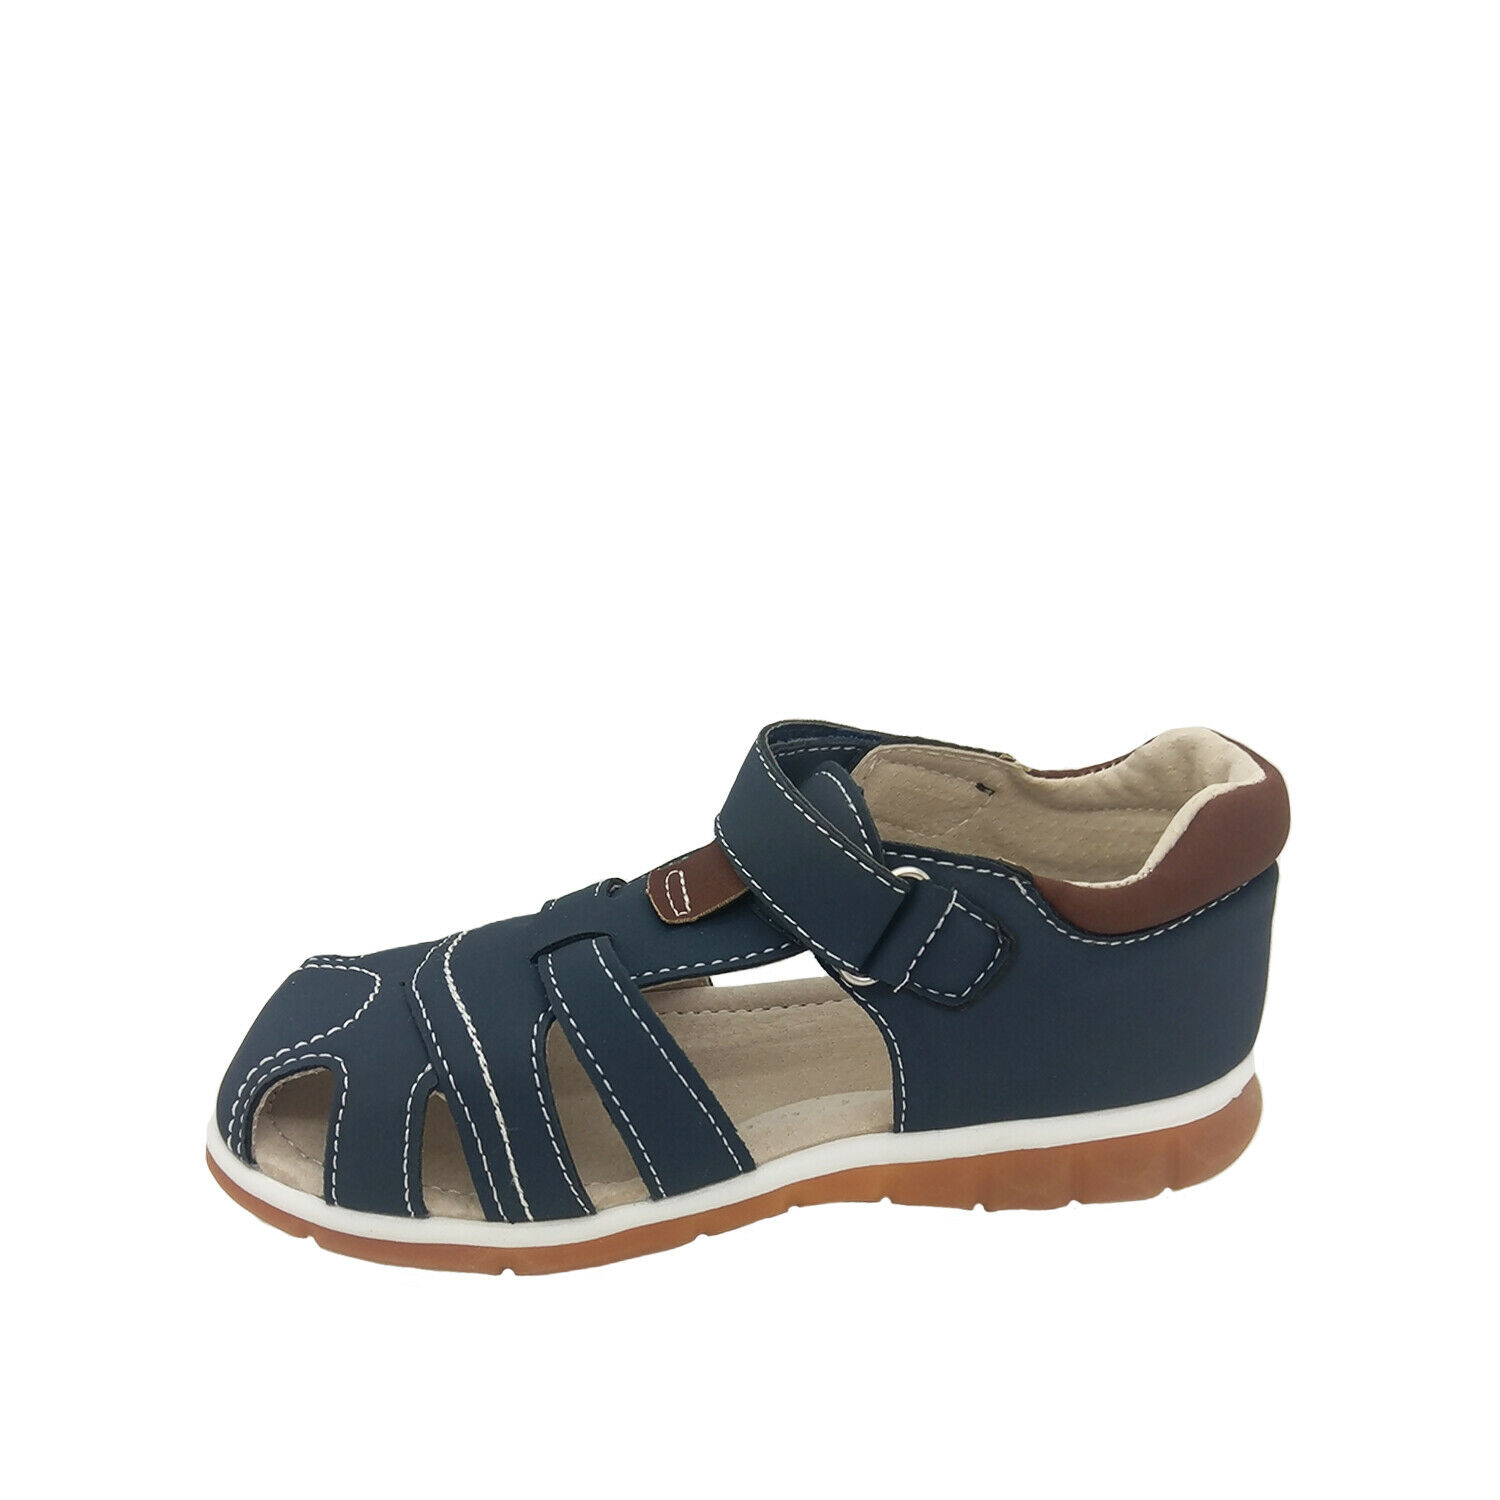 Boys Shoes Grosby Nathan Sandal Closed Toe Heel Soft 2 Tone Navy/Tan Size 4-8.5 